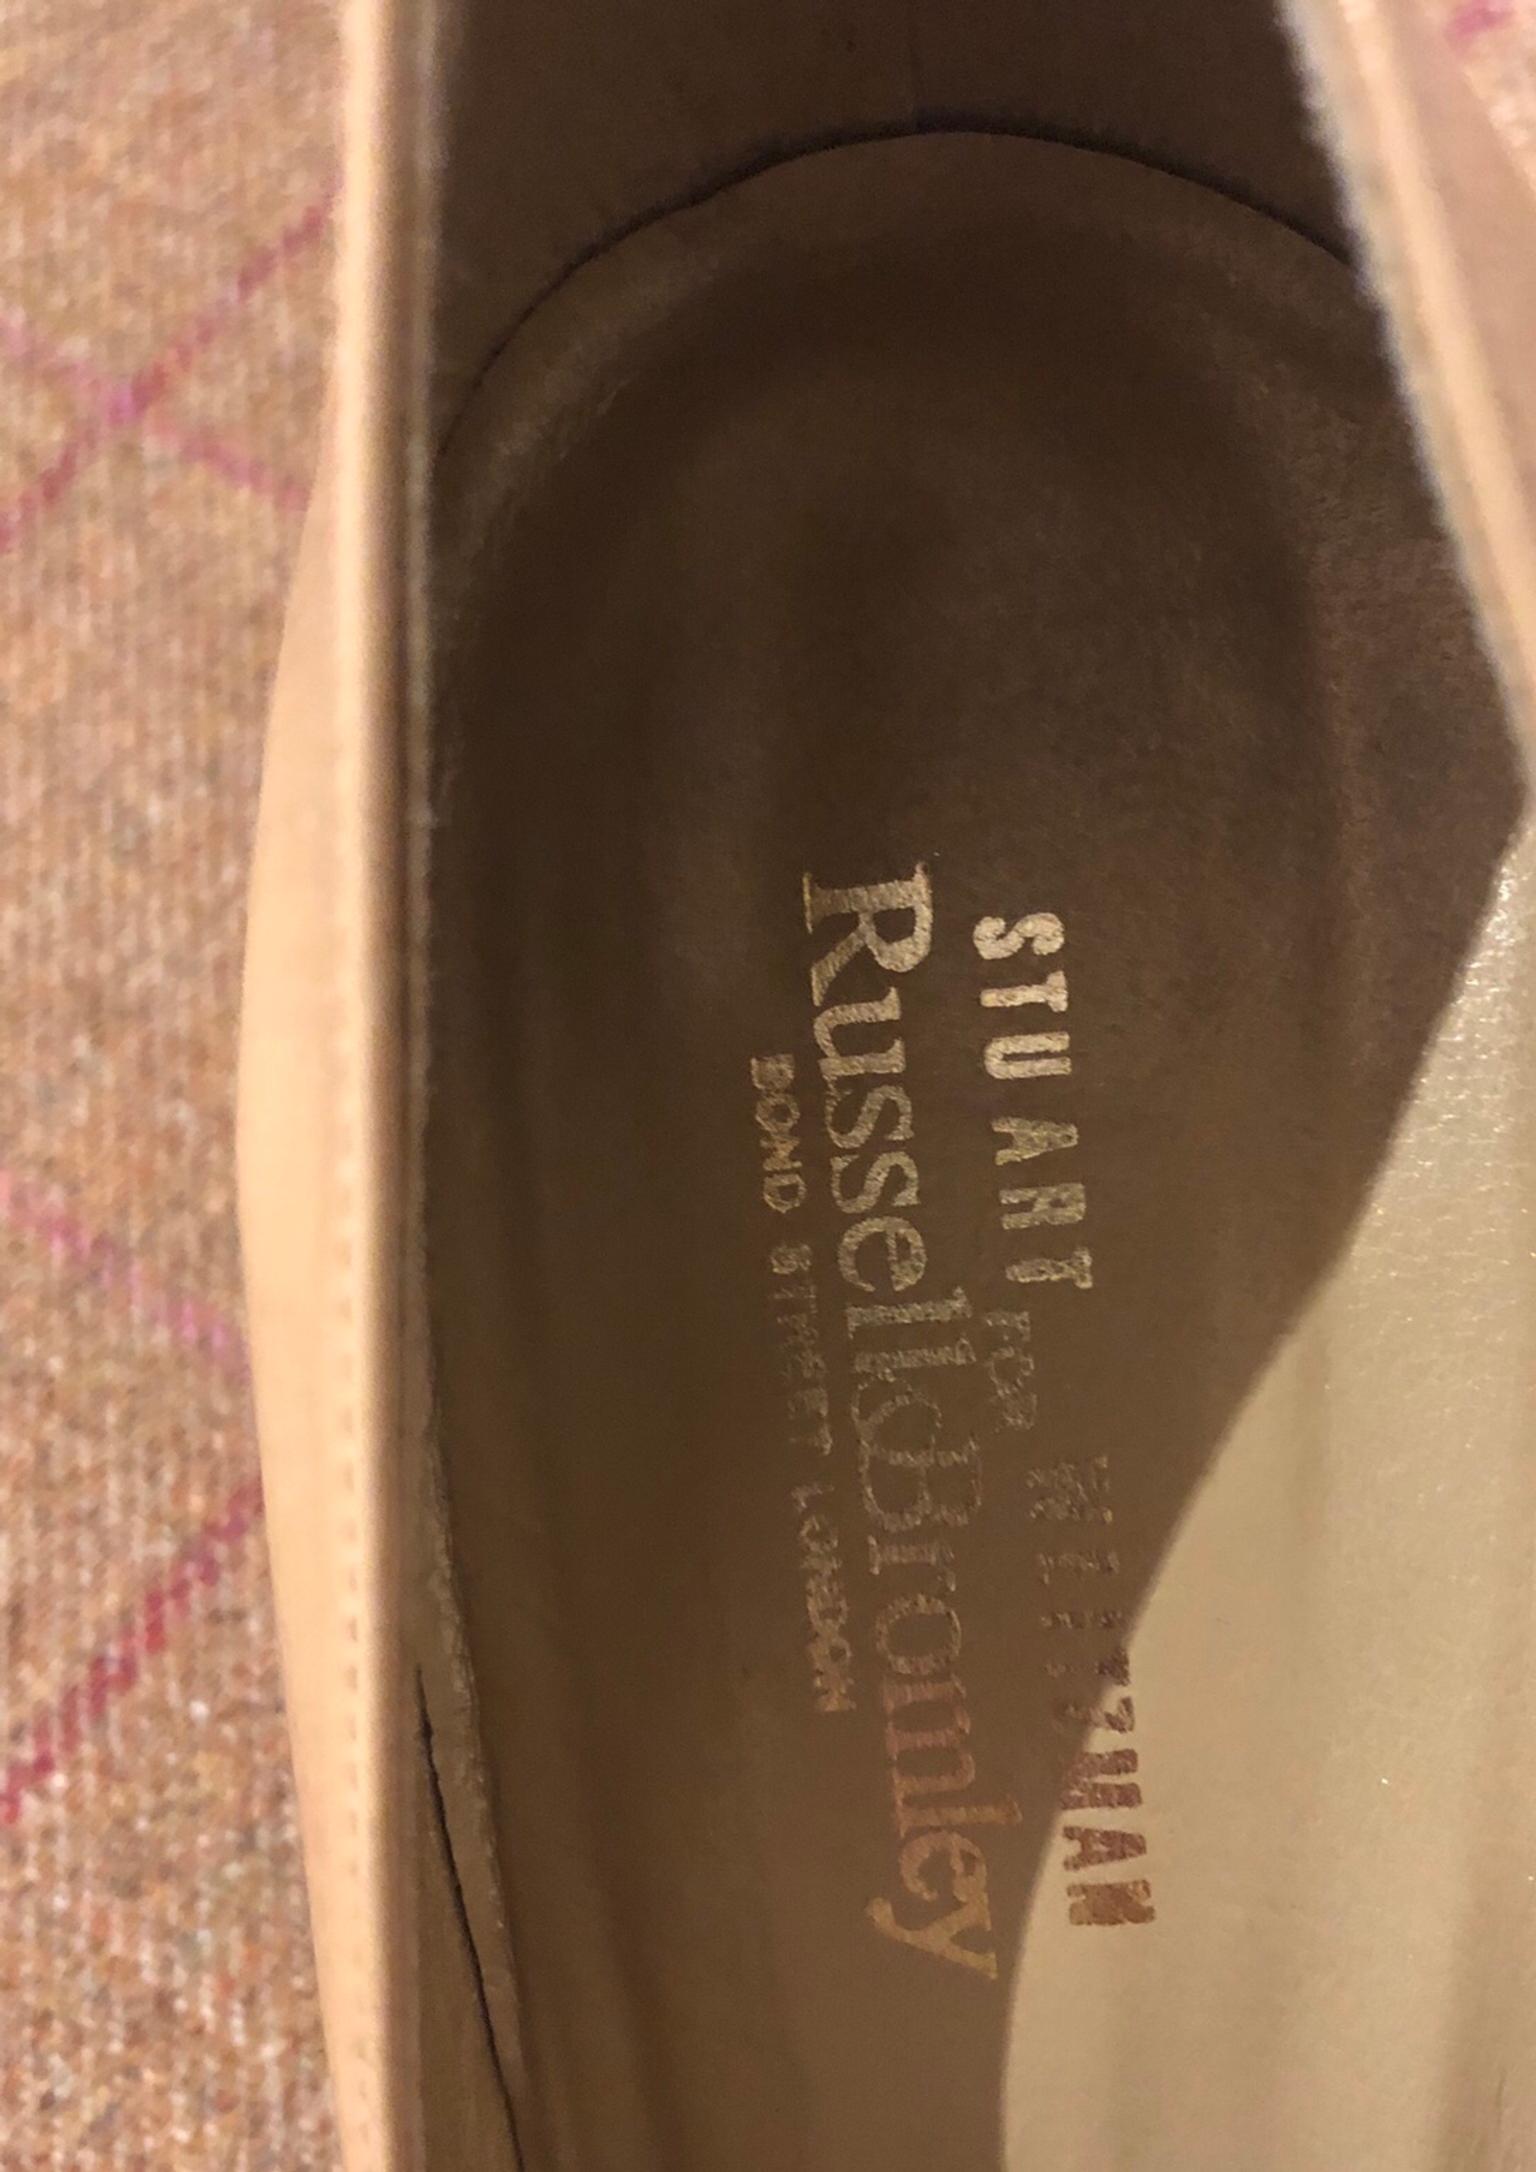 russell and bromley stuart weitzman